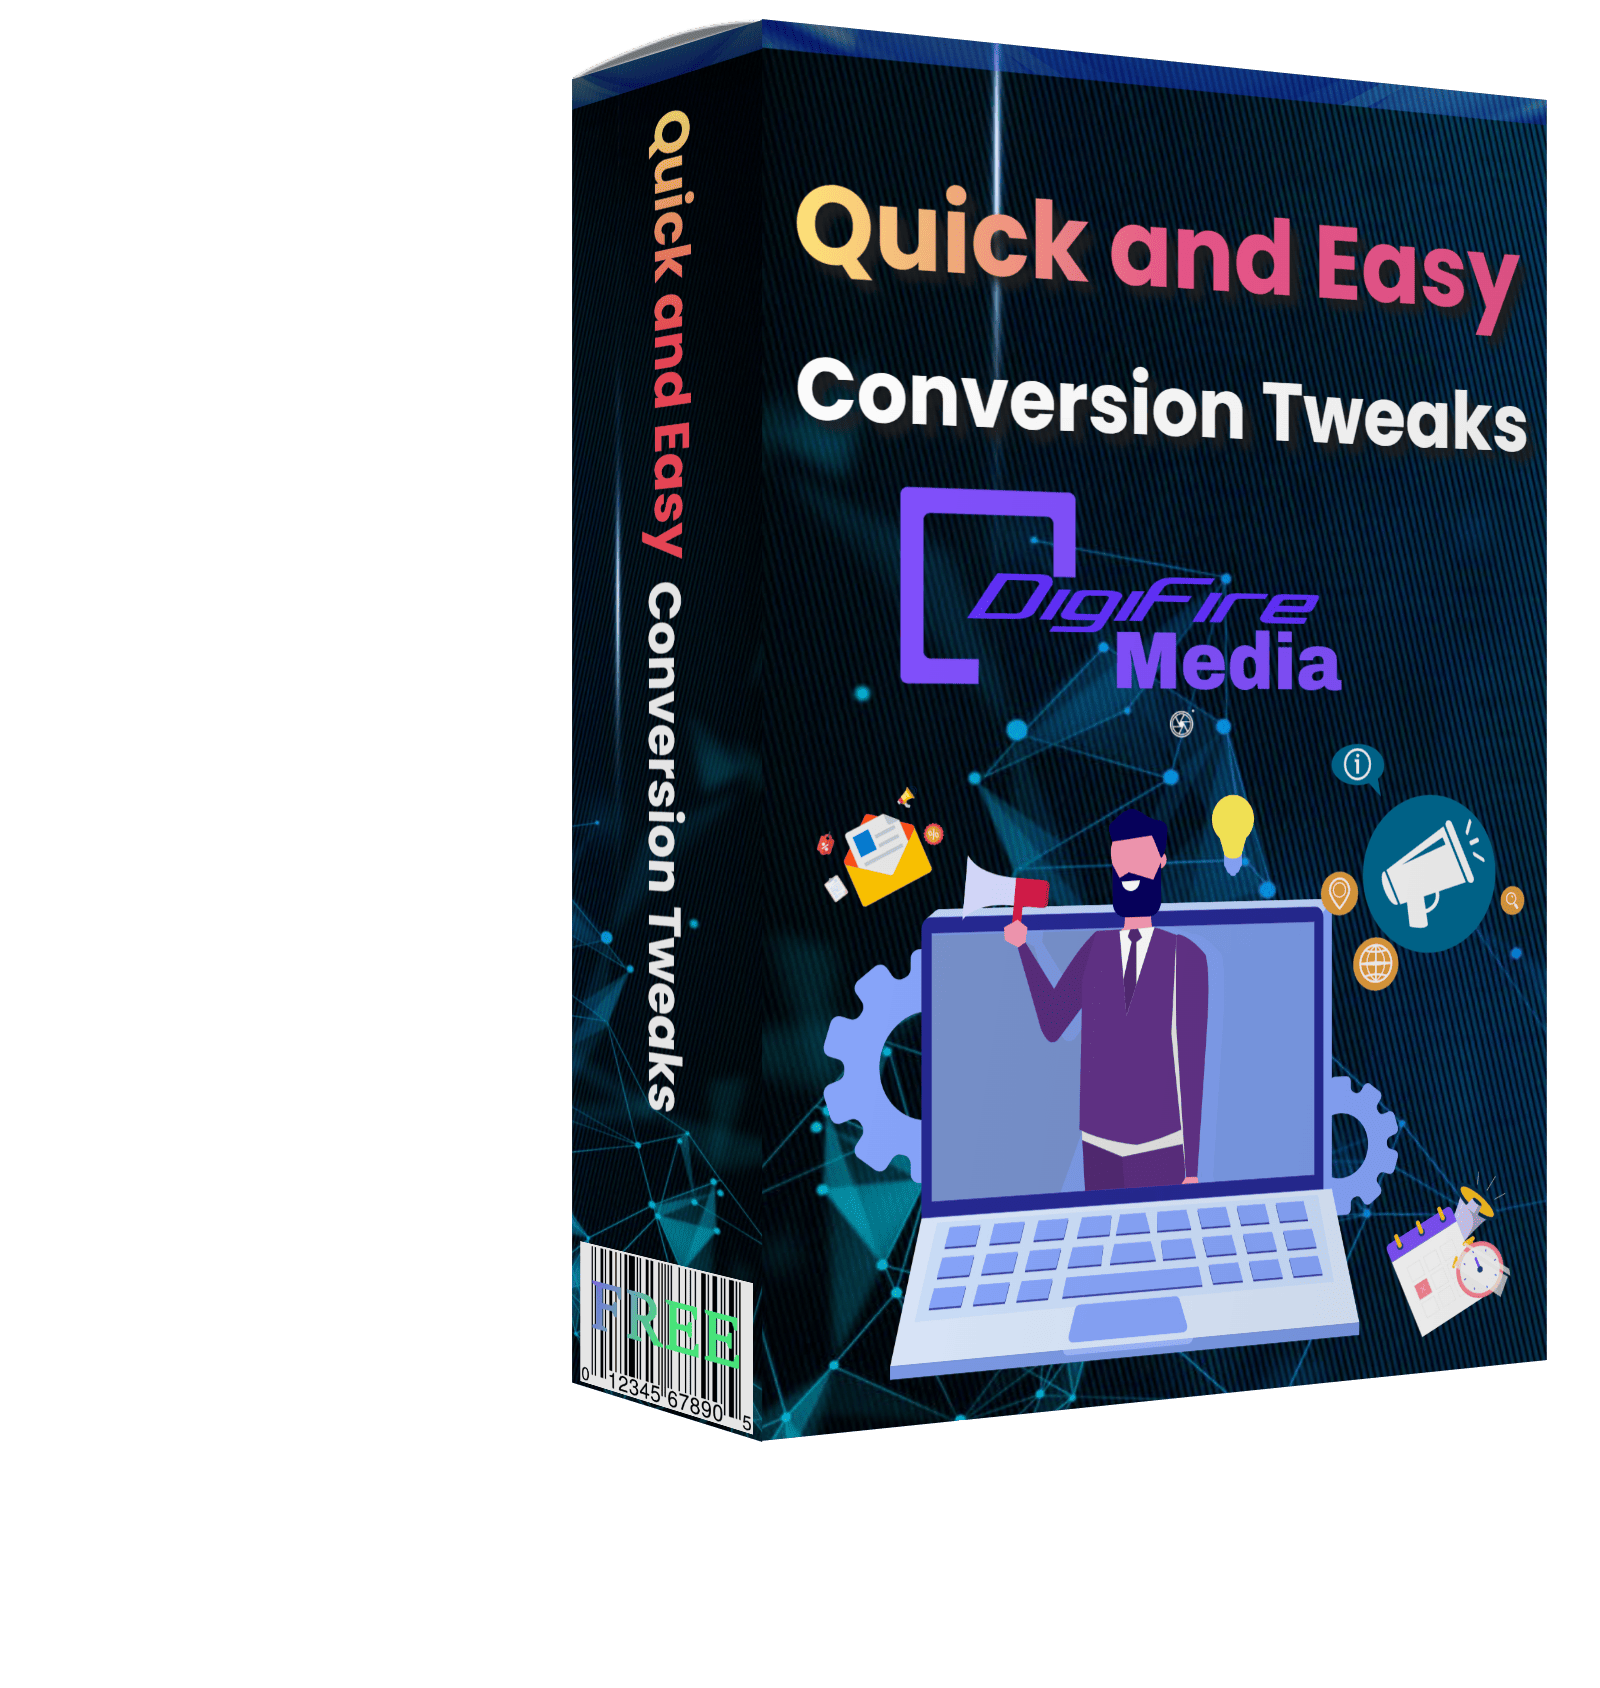 Quick and Easy Conversion Tweaks